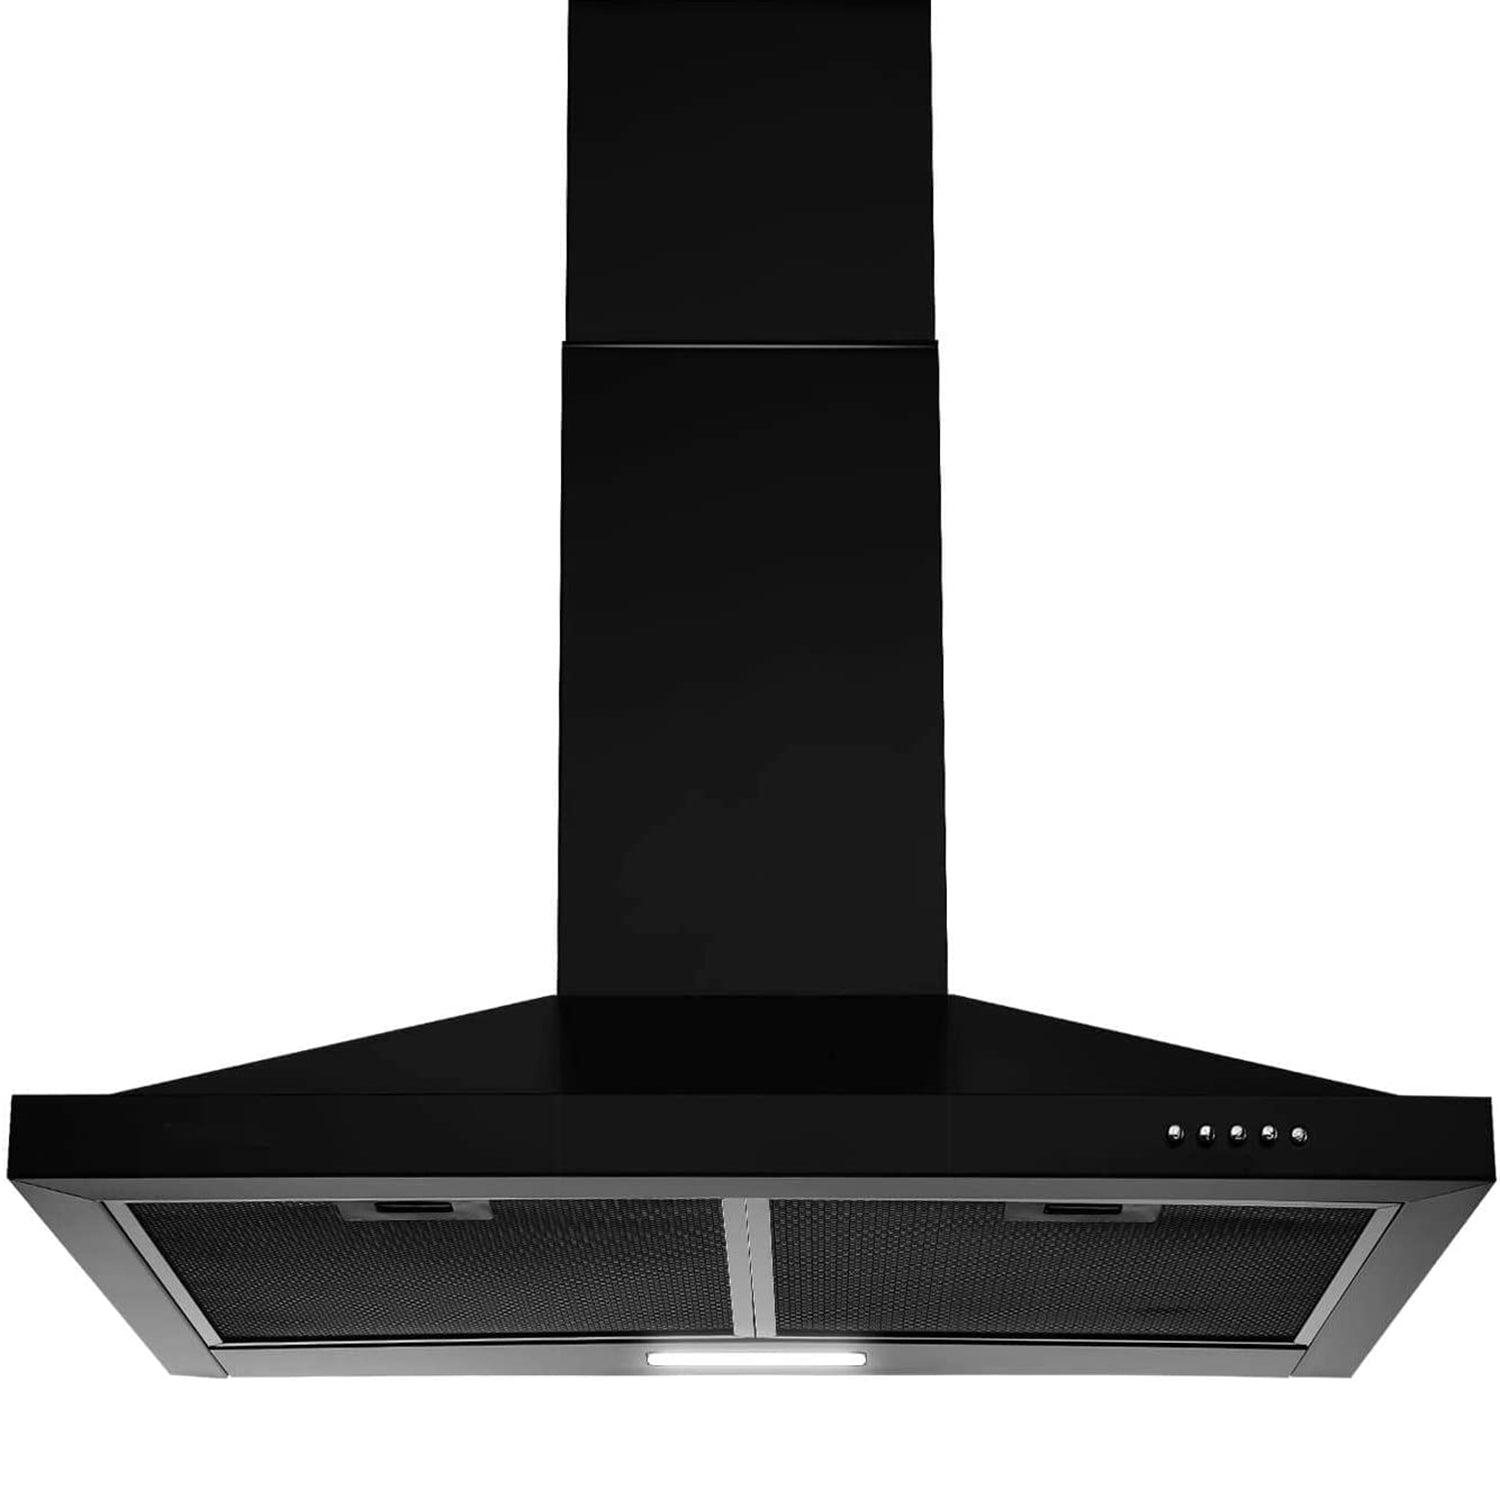 Tieasy 24 inch Wall Mount Black Range Hood Ducted/Ductless Convertible - GD1760BPA